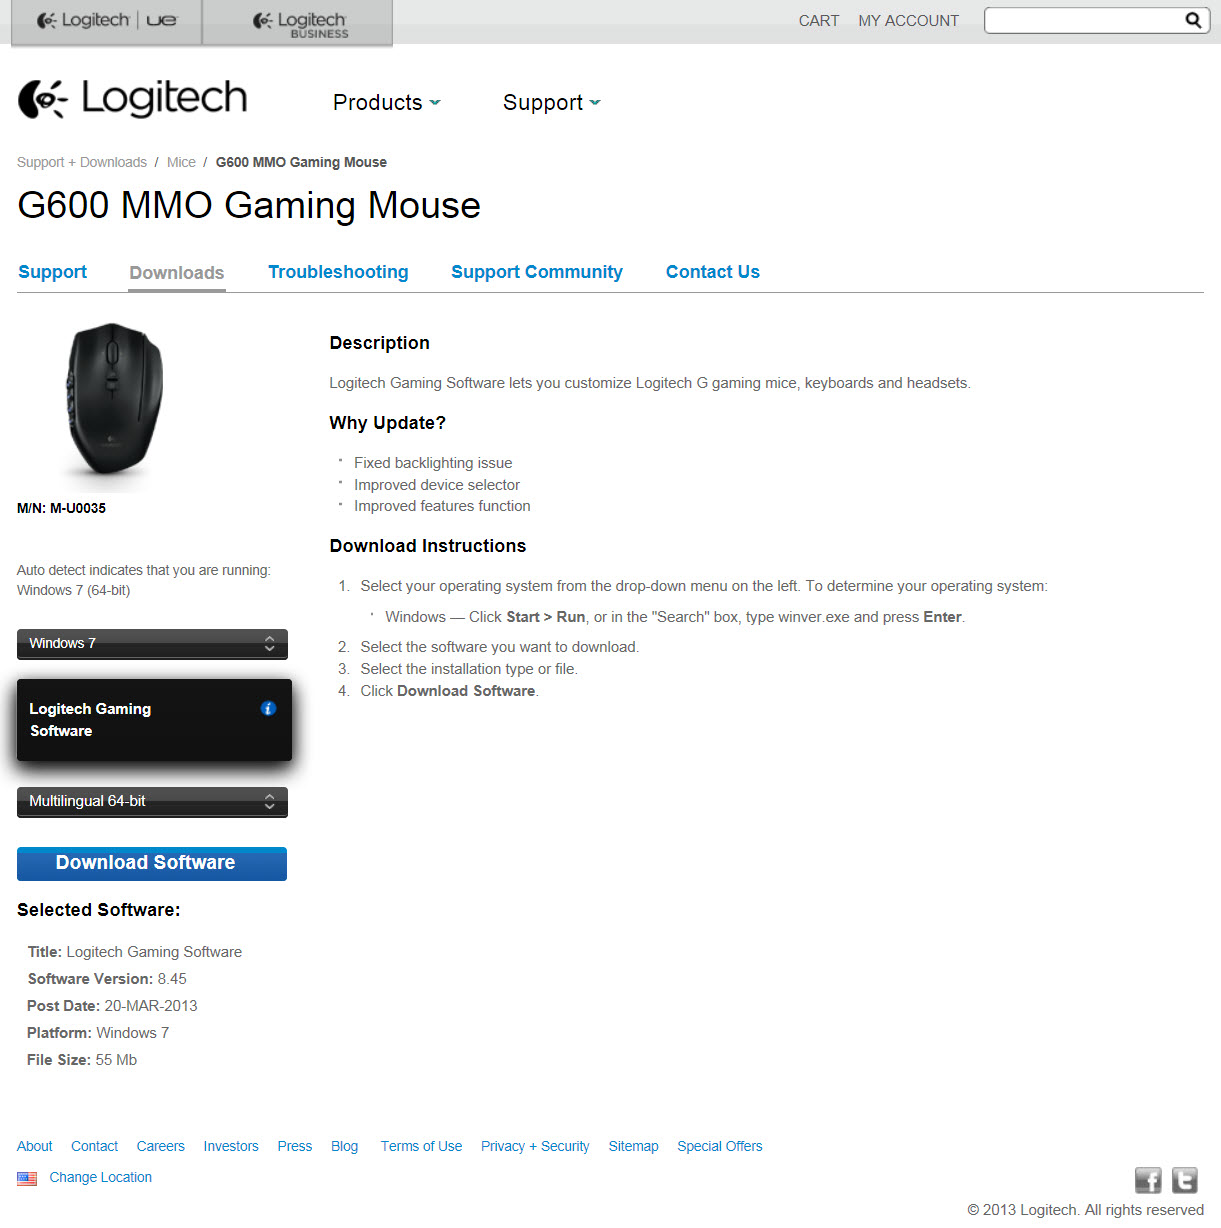 G600 MMO Gaming Mouse Review